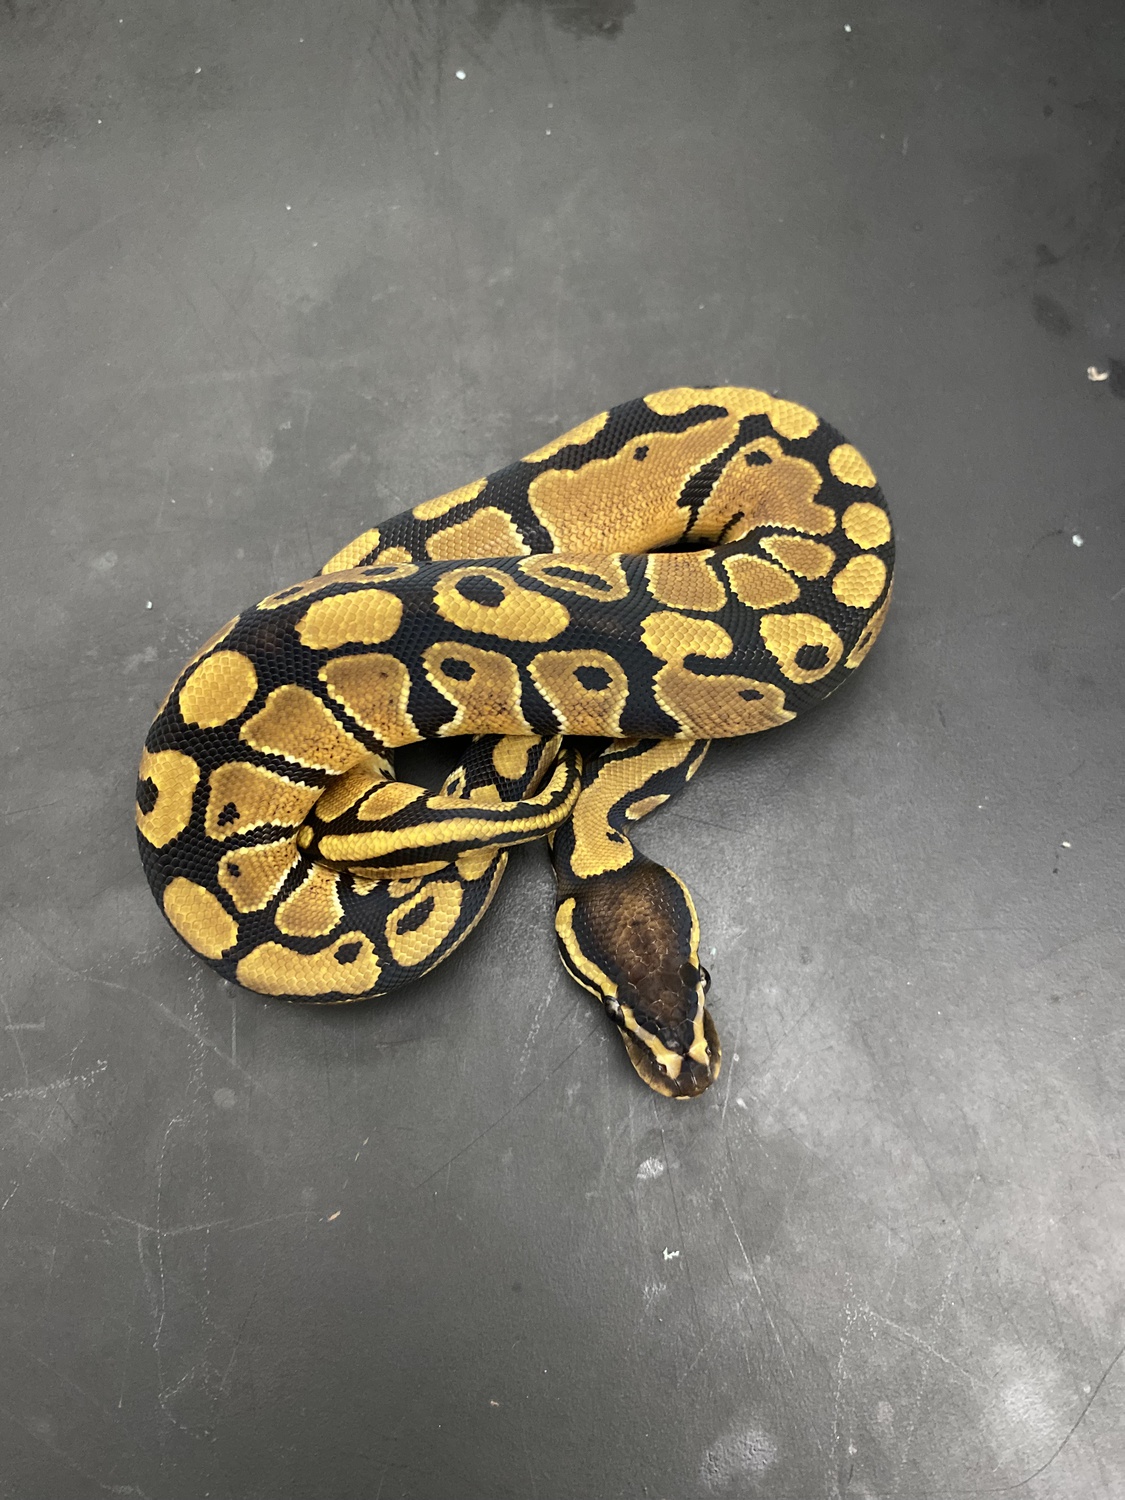 Epic Het Clown Ball Python by Saunders Snakes